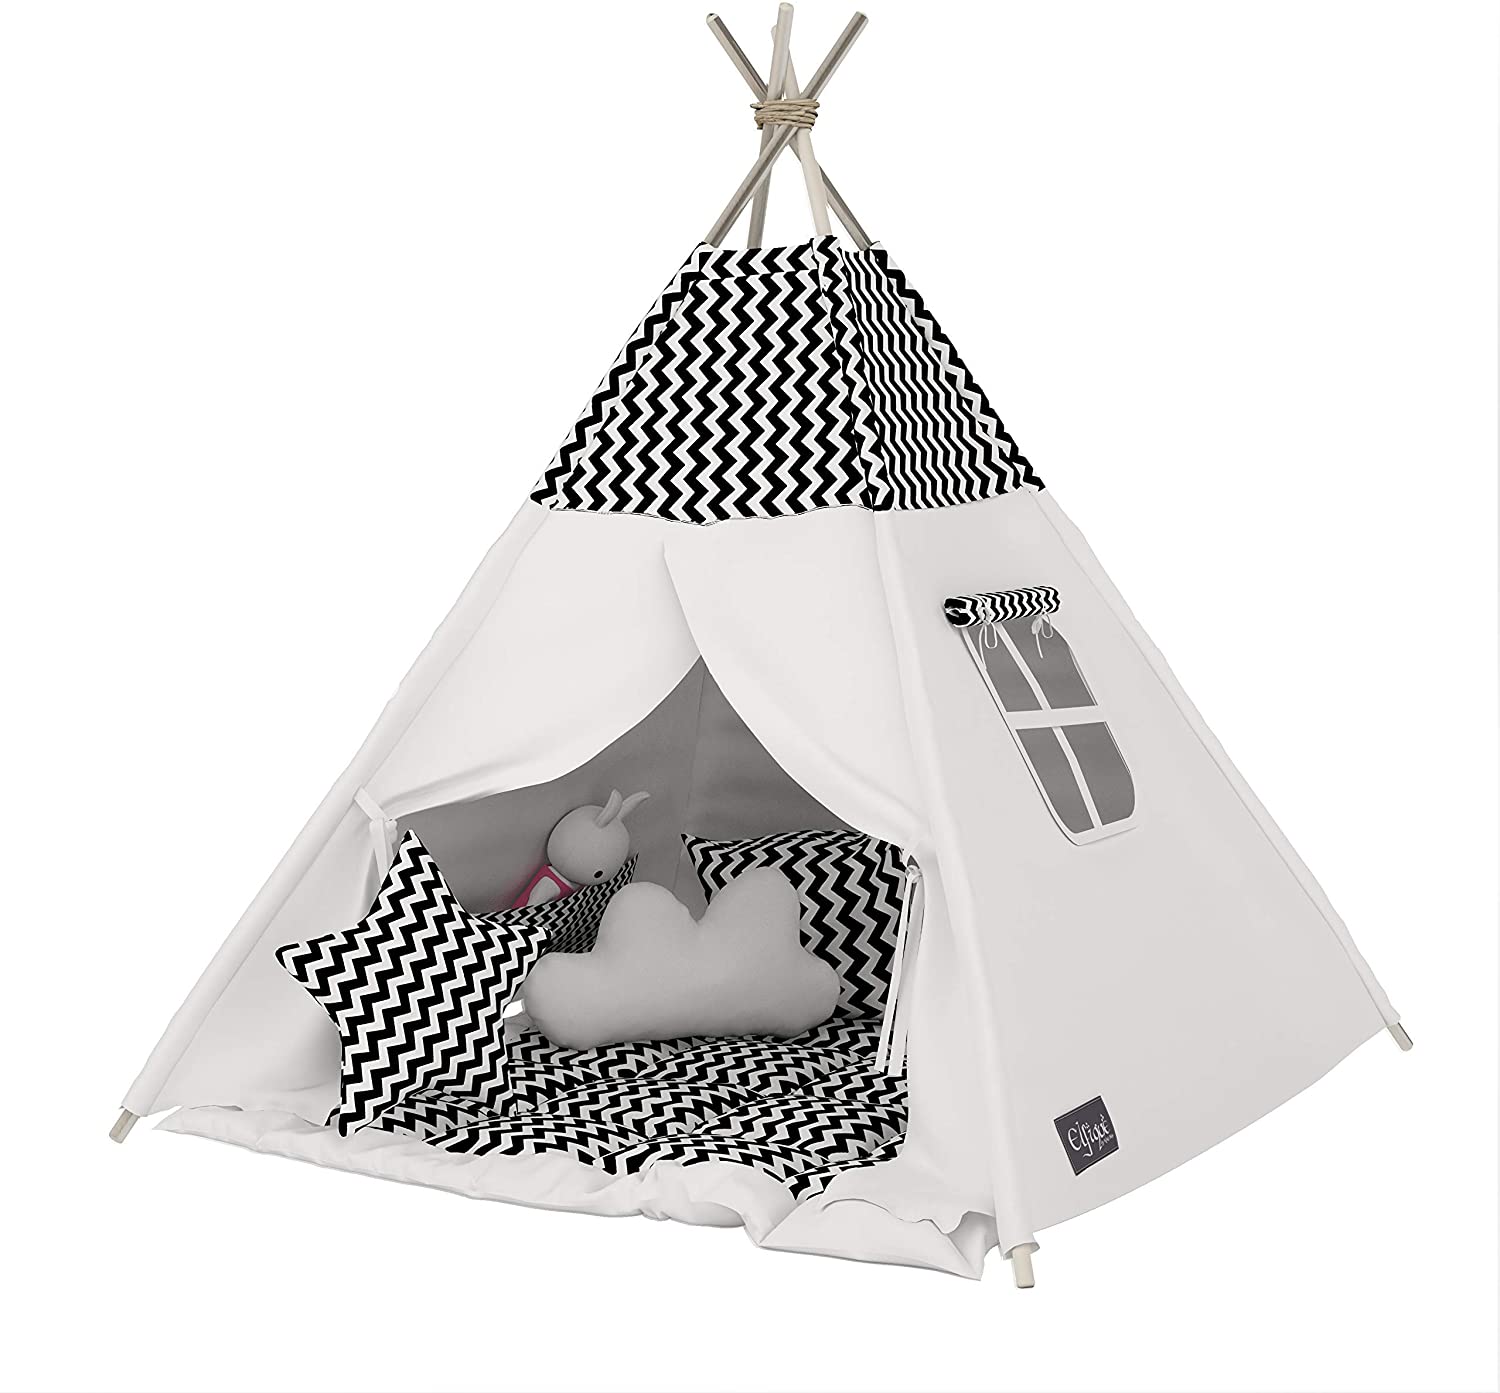 Elfique new Tipi Indian Tent play Tent Double Padded Blanket (Tent with Bla